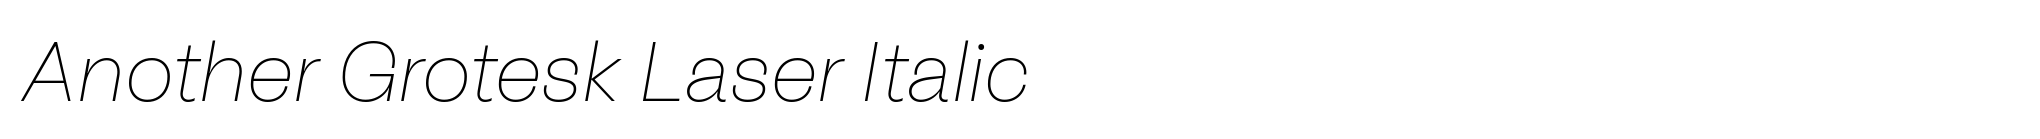 Another Grotesk Laser Italic image